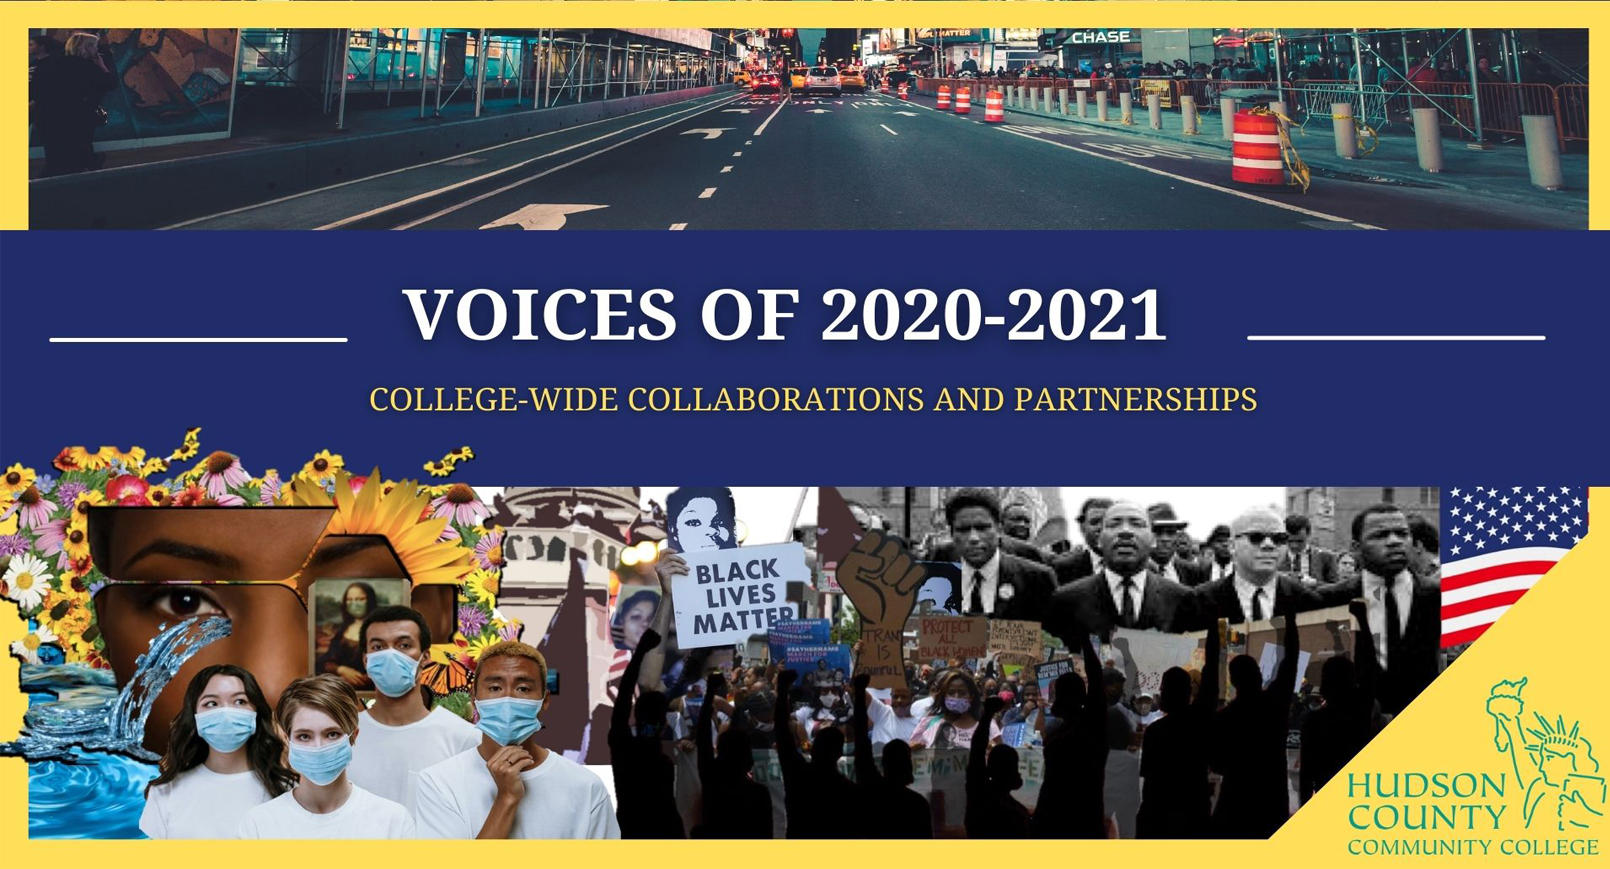 Voices of 2020-2021